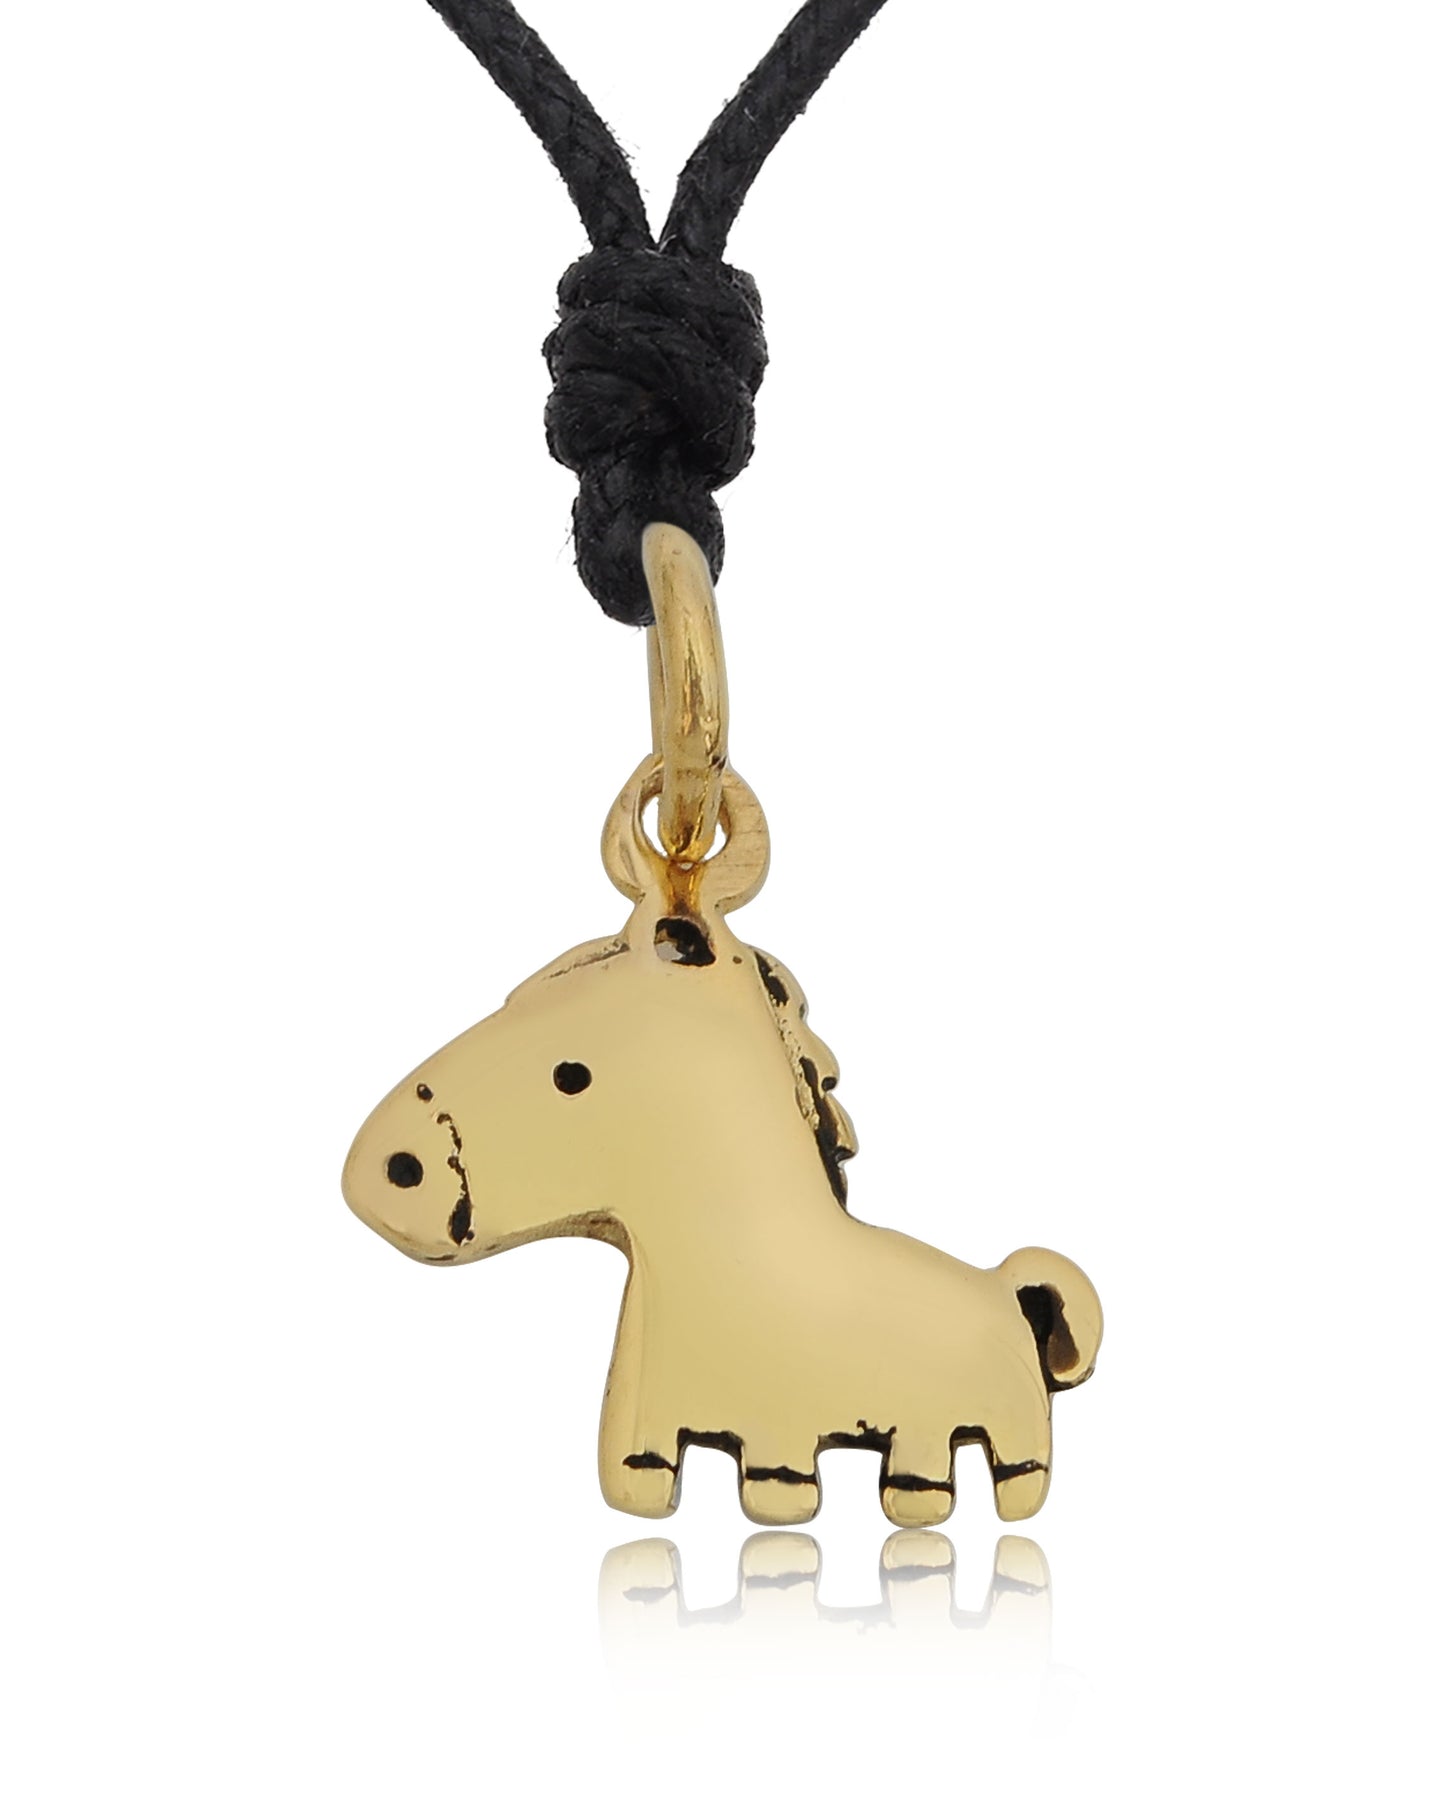 Unique Handmade Horse Handmade Brass Charm Necklace Pendant Jewelry With Cotton Cord